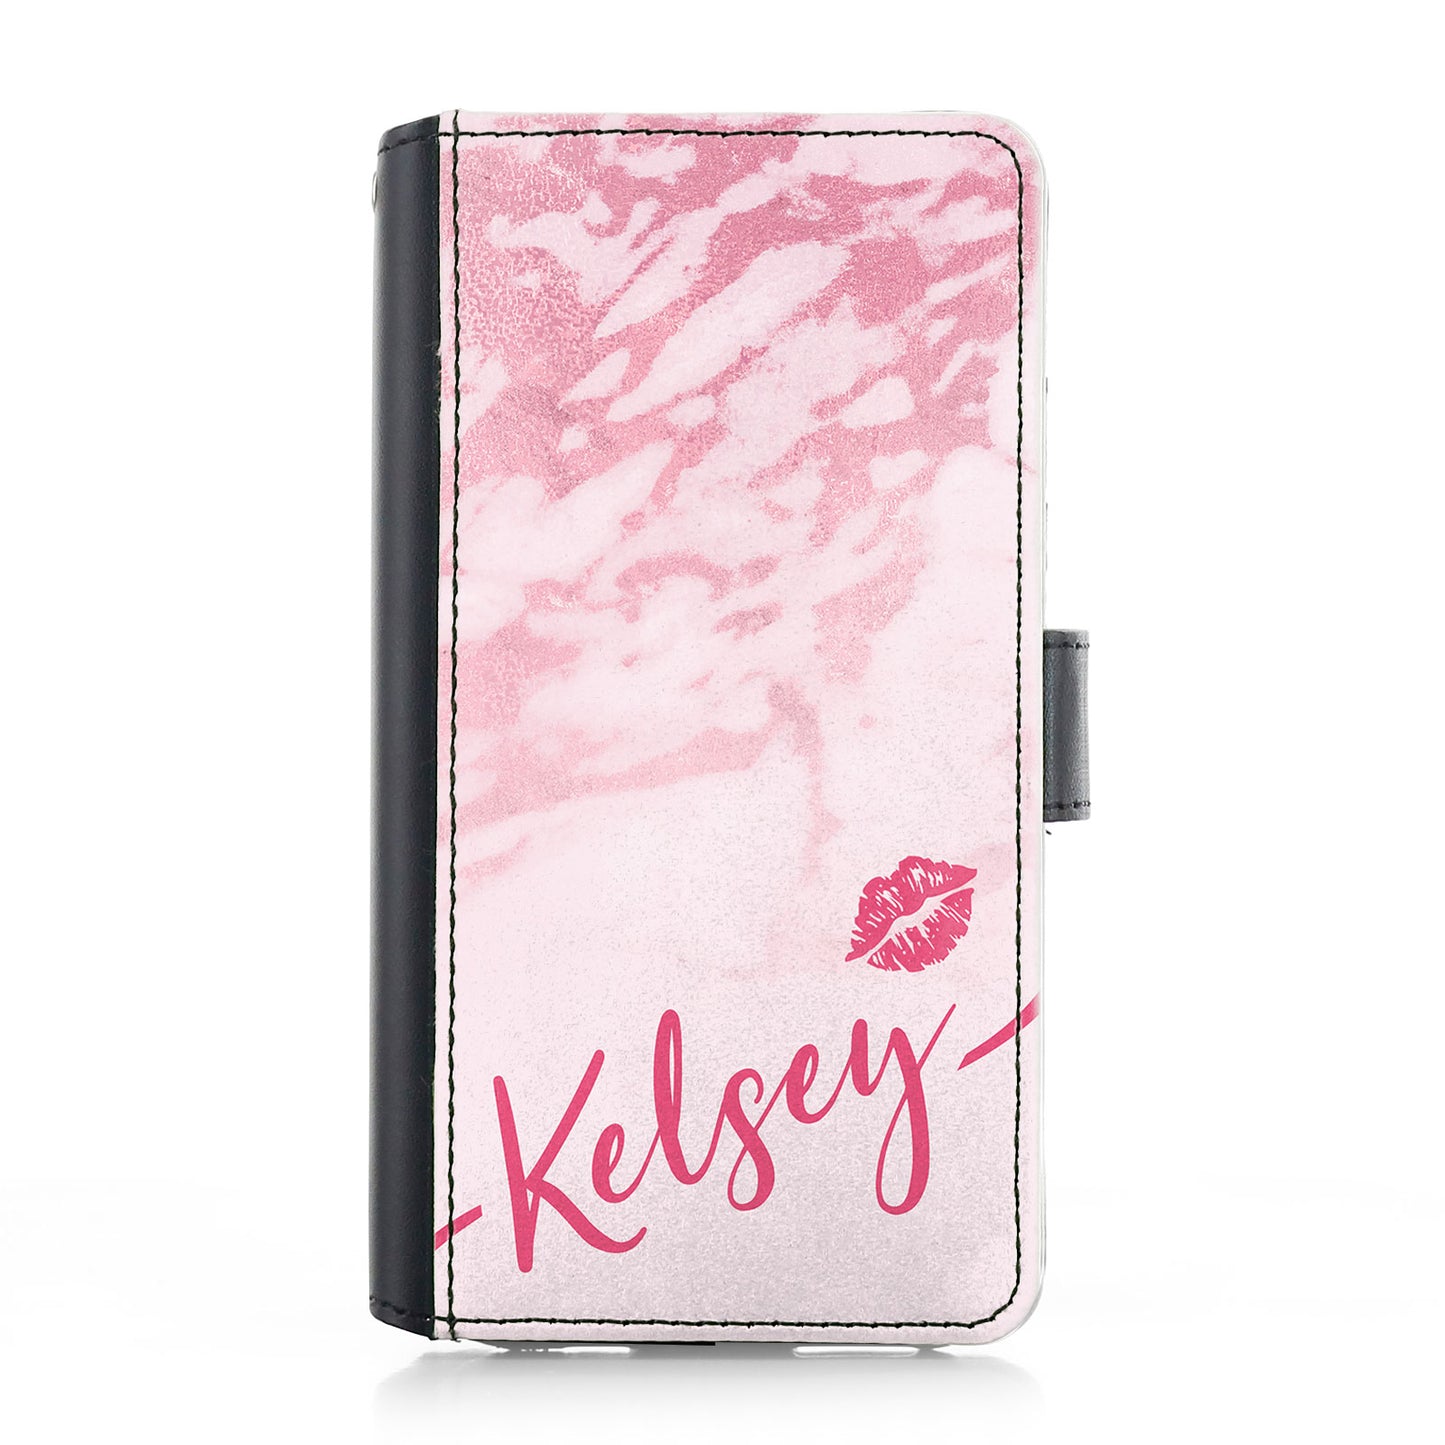 Personalised iPhone Leather Case - Pink Marble and Kiss